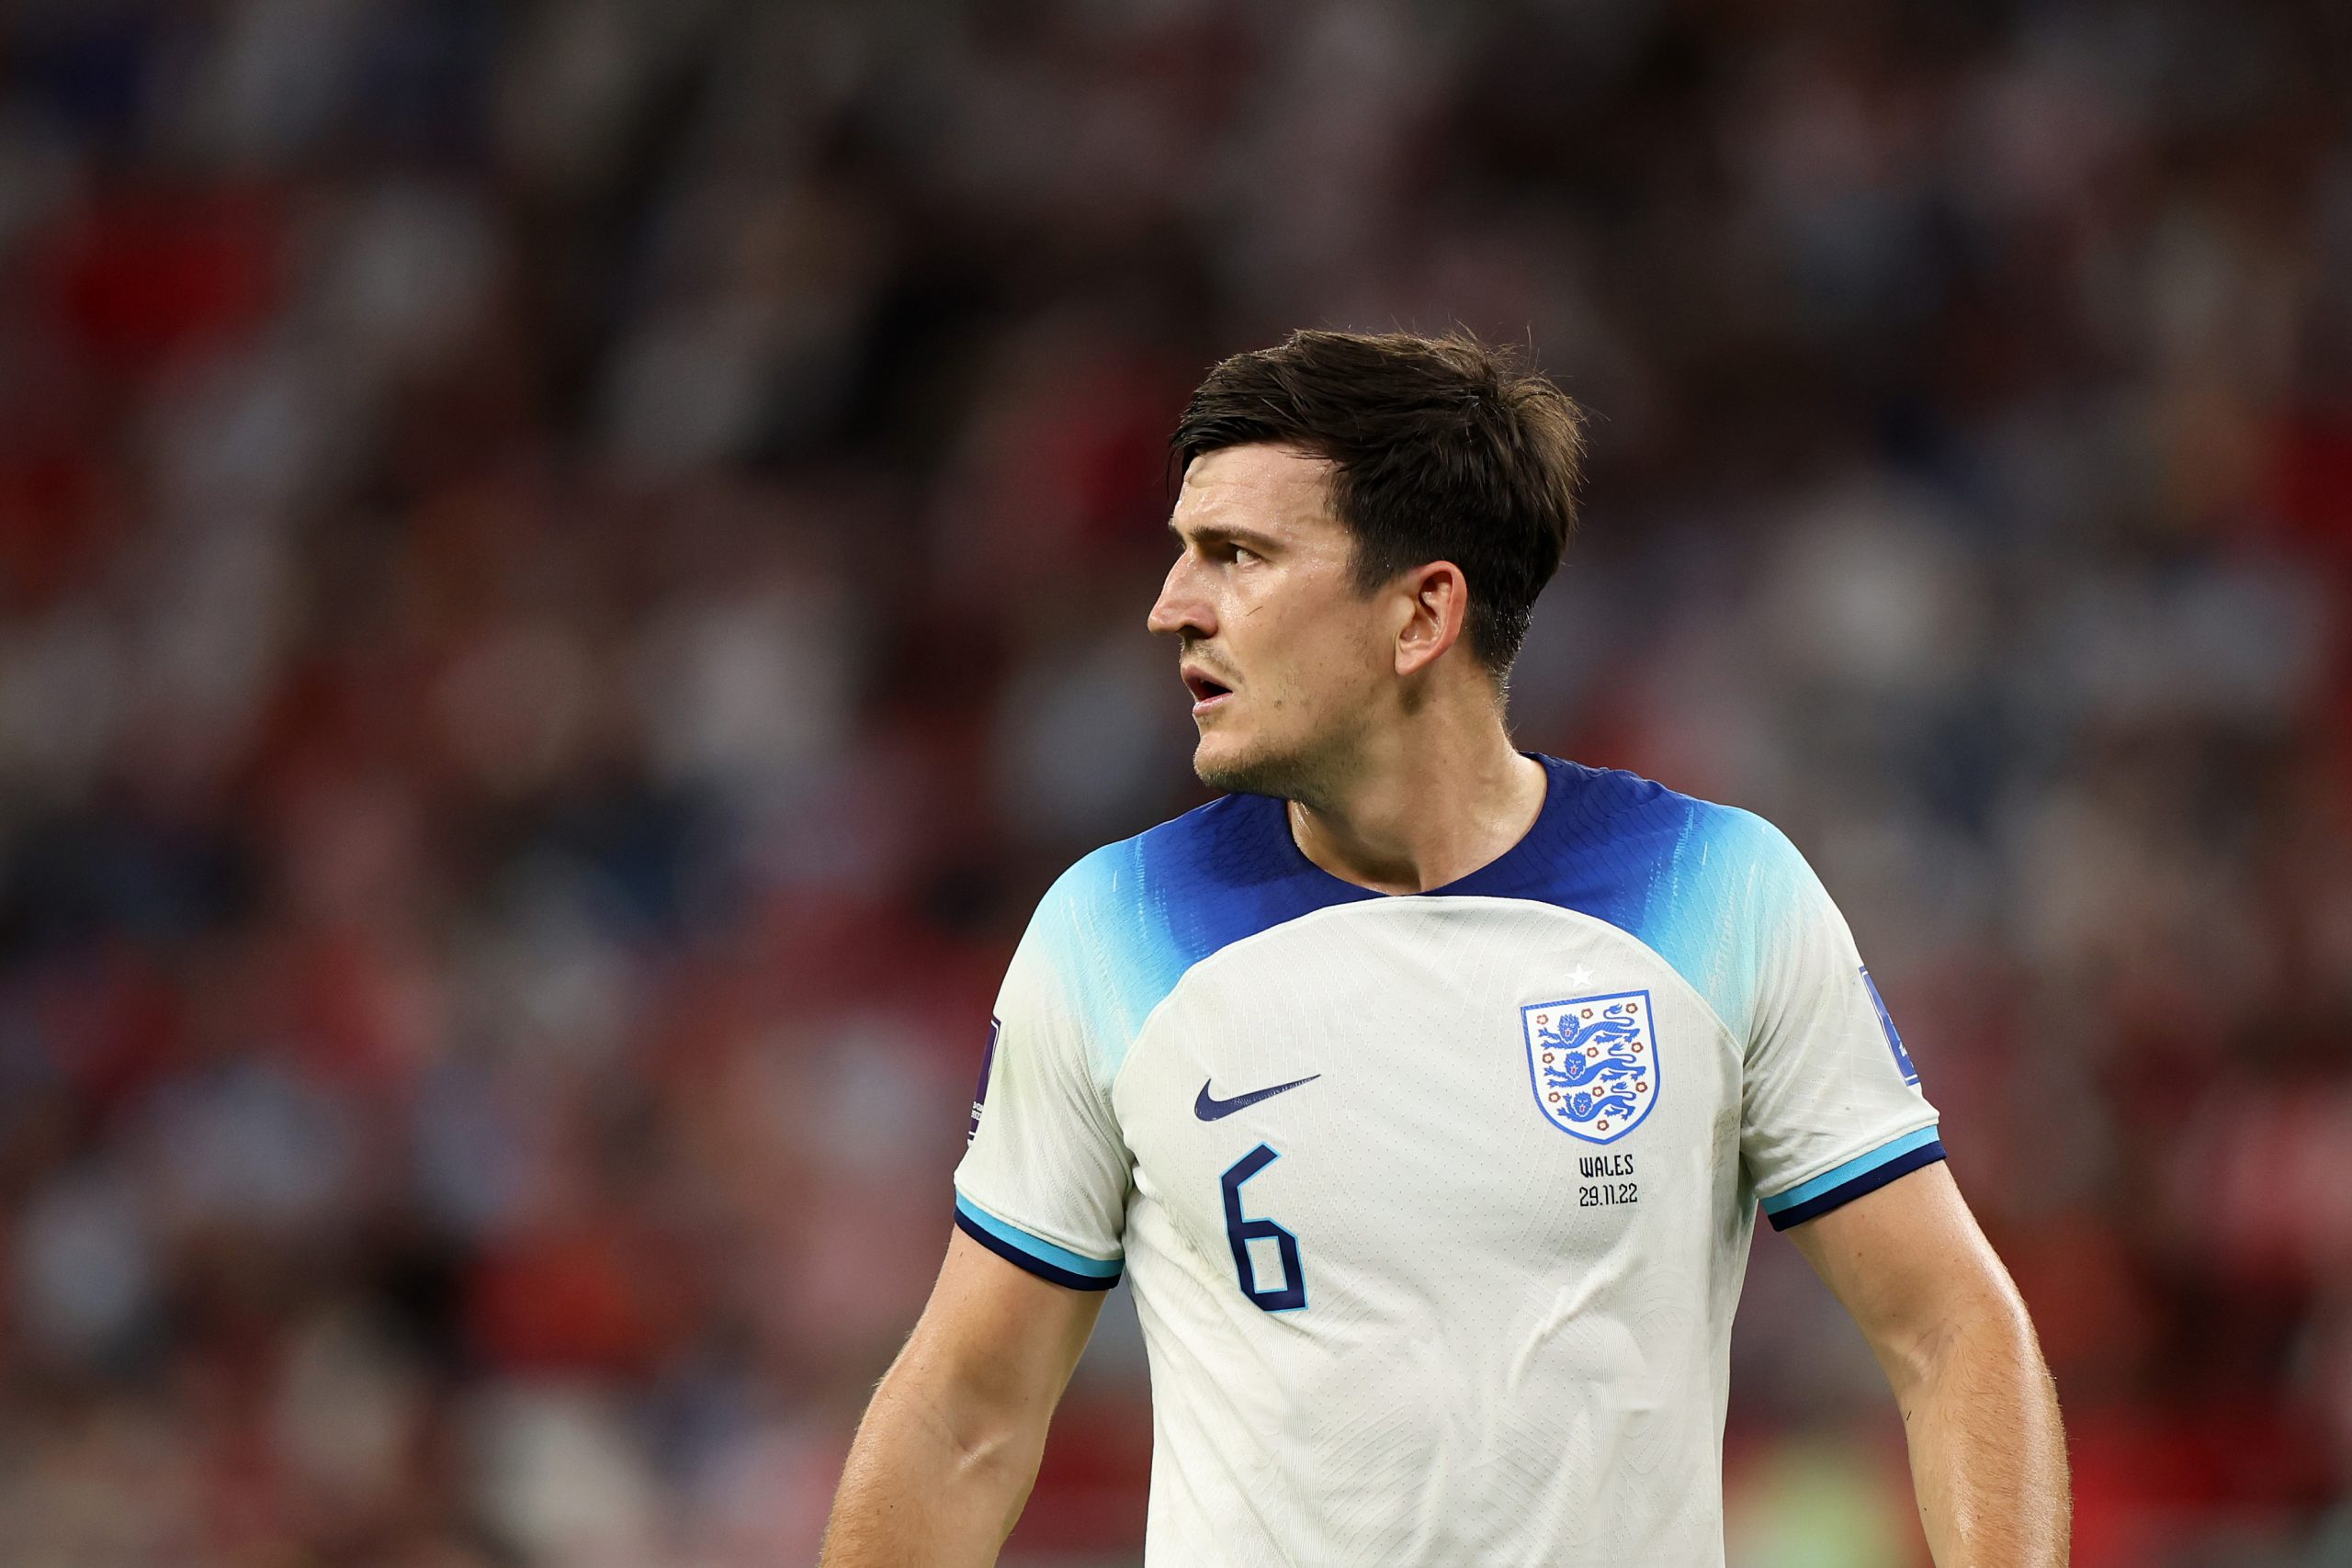 Harry Maguire of Englandand Manchester United. (Photo by Francois Nel/Getty Images)